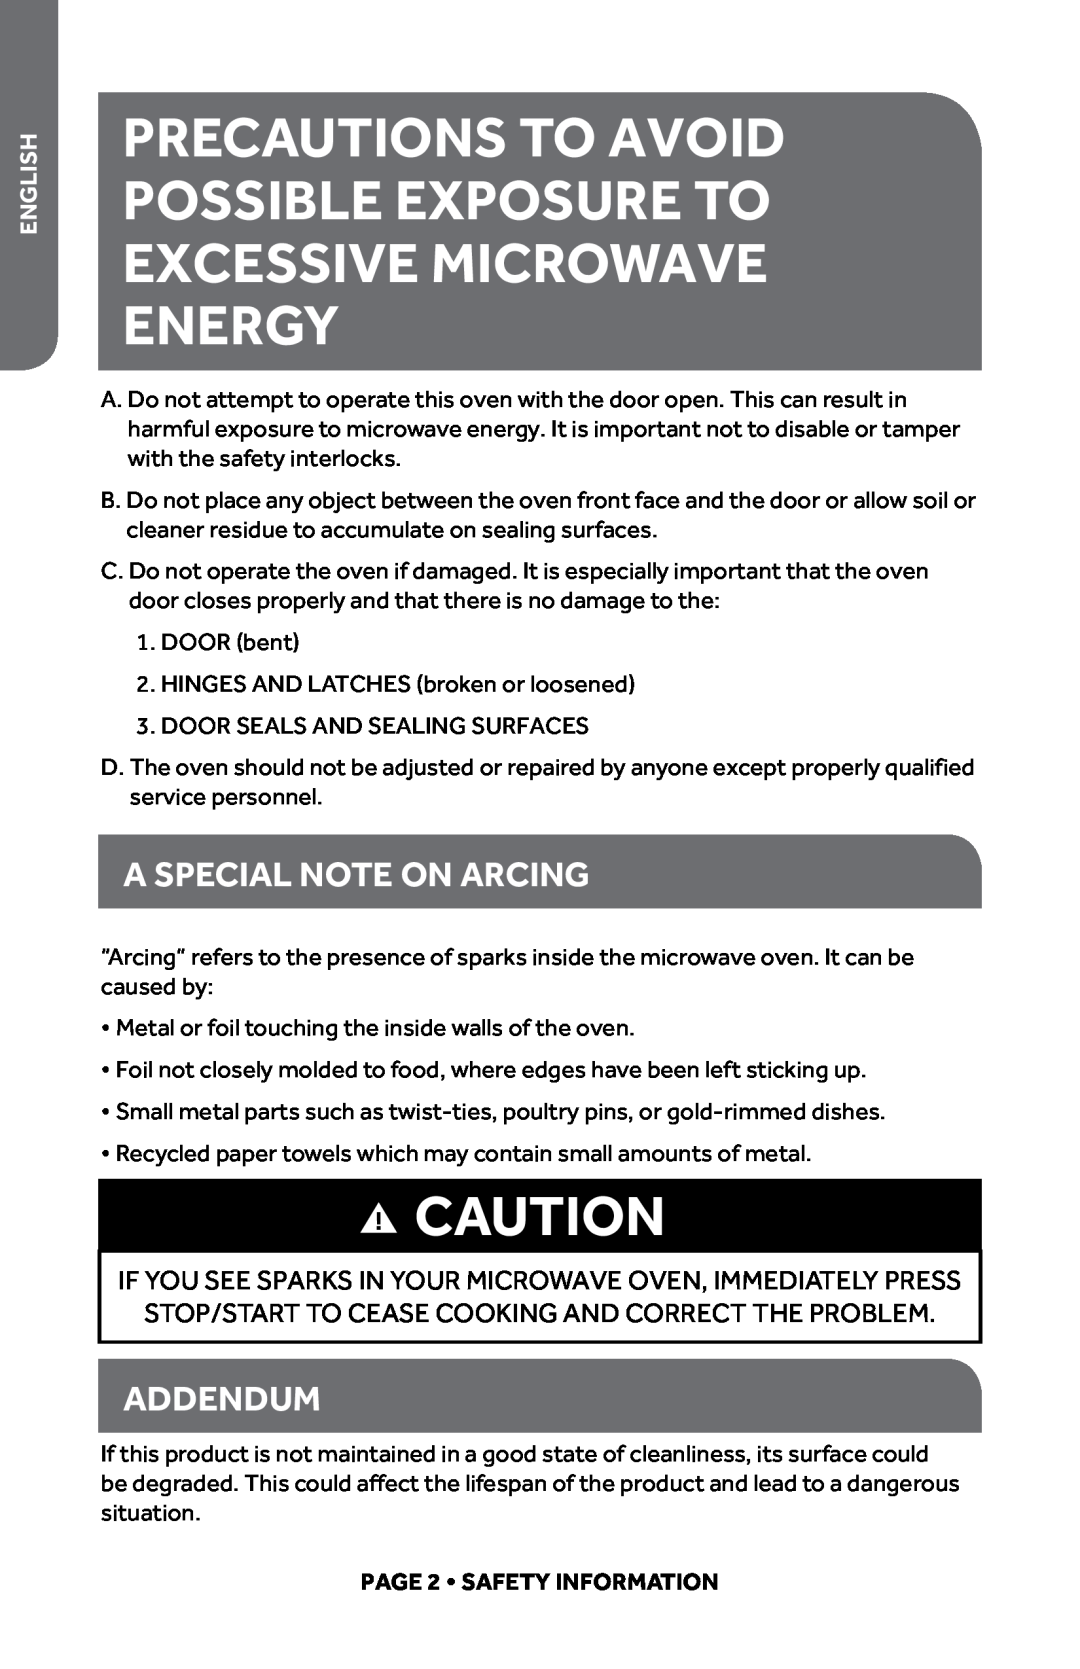 Haier HMC1085SESS A Special Note on Arcing, Addendum, Precautions To Avoid Possible Exposure To Excessive Microwave Energy 